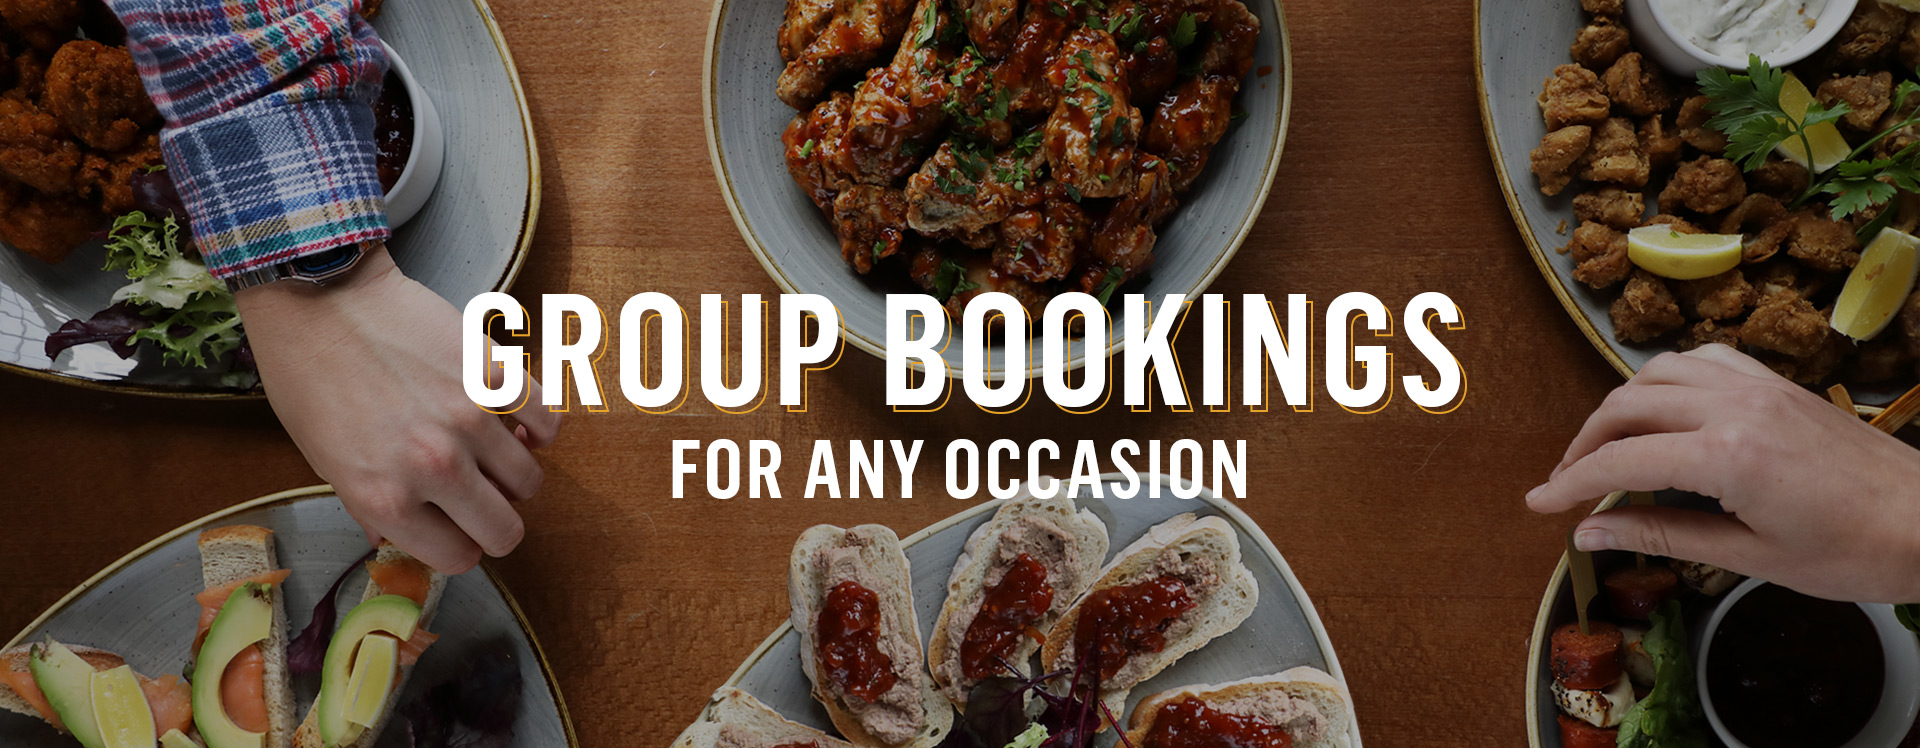 Group Bookings at The Argyll Arms